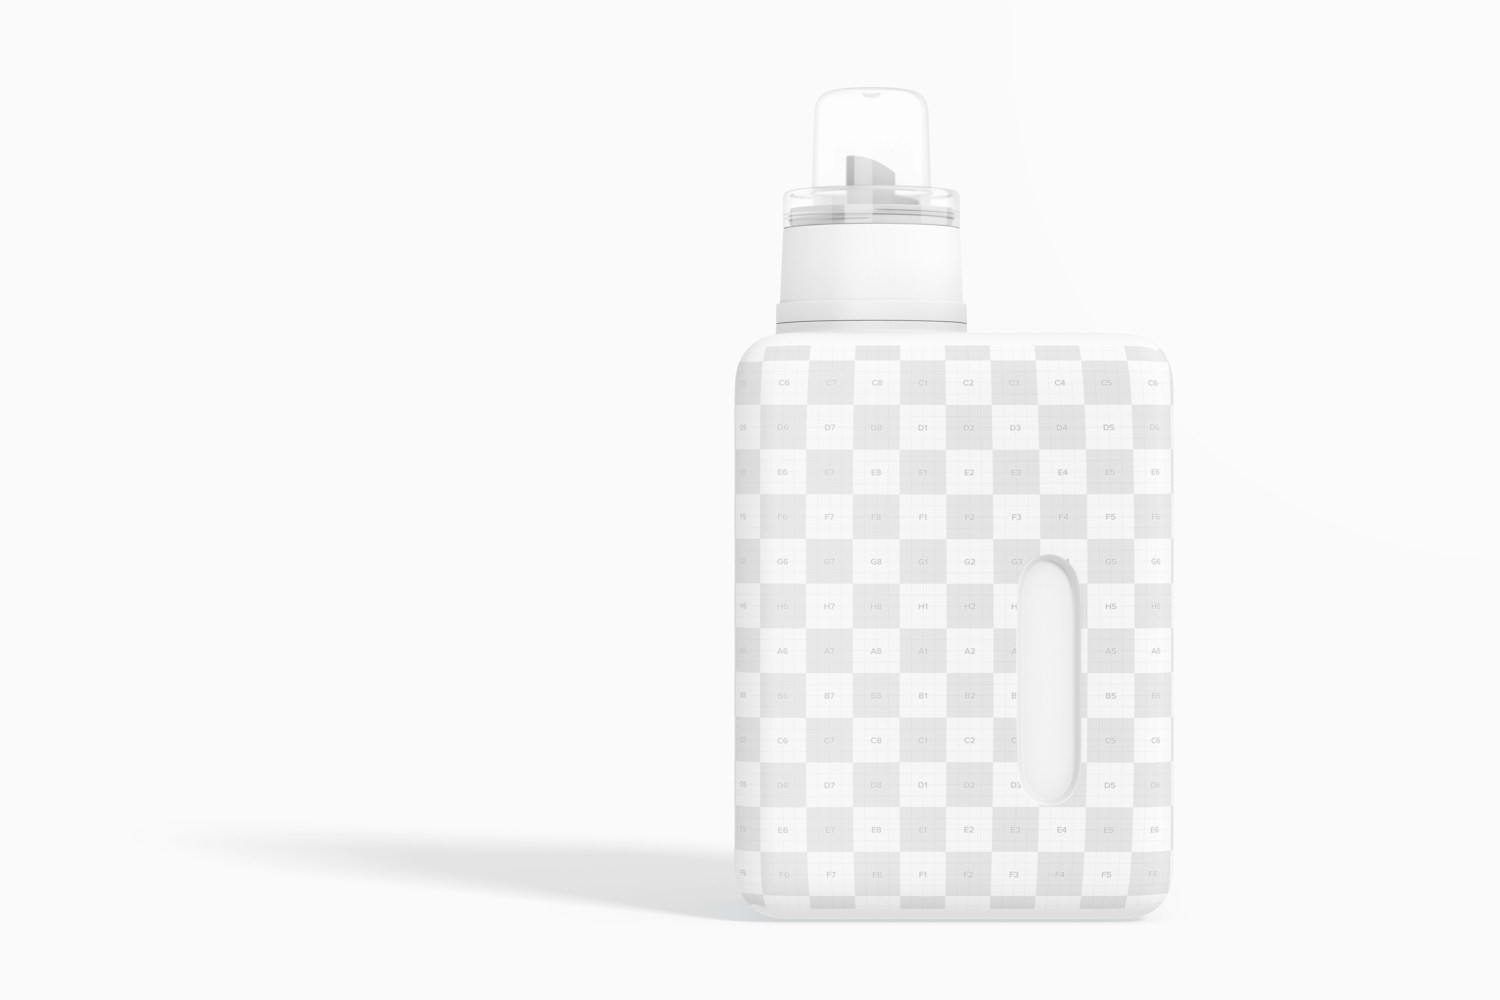 Square Laundry Bottle Mockup, Front View